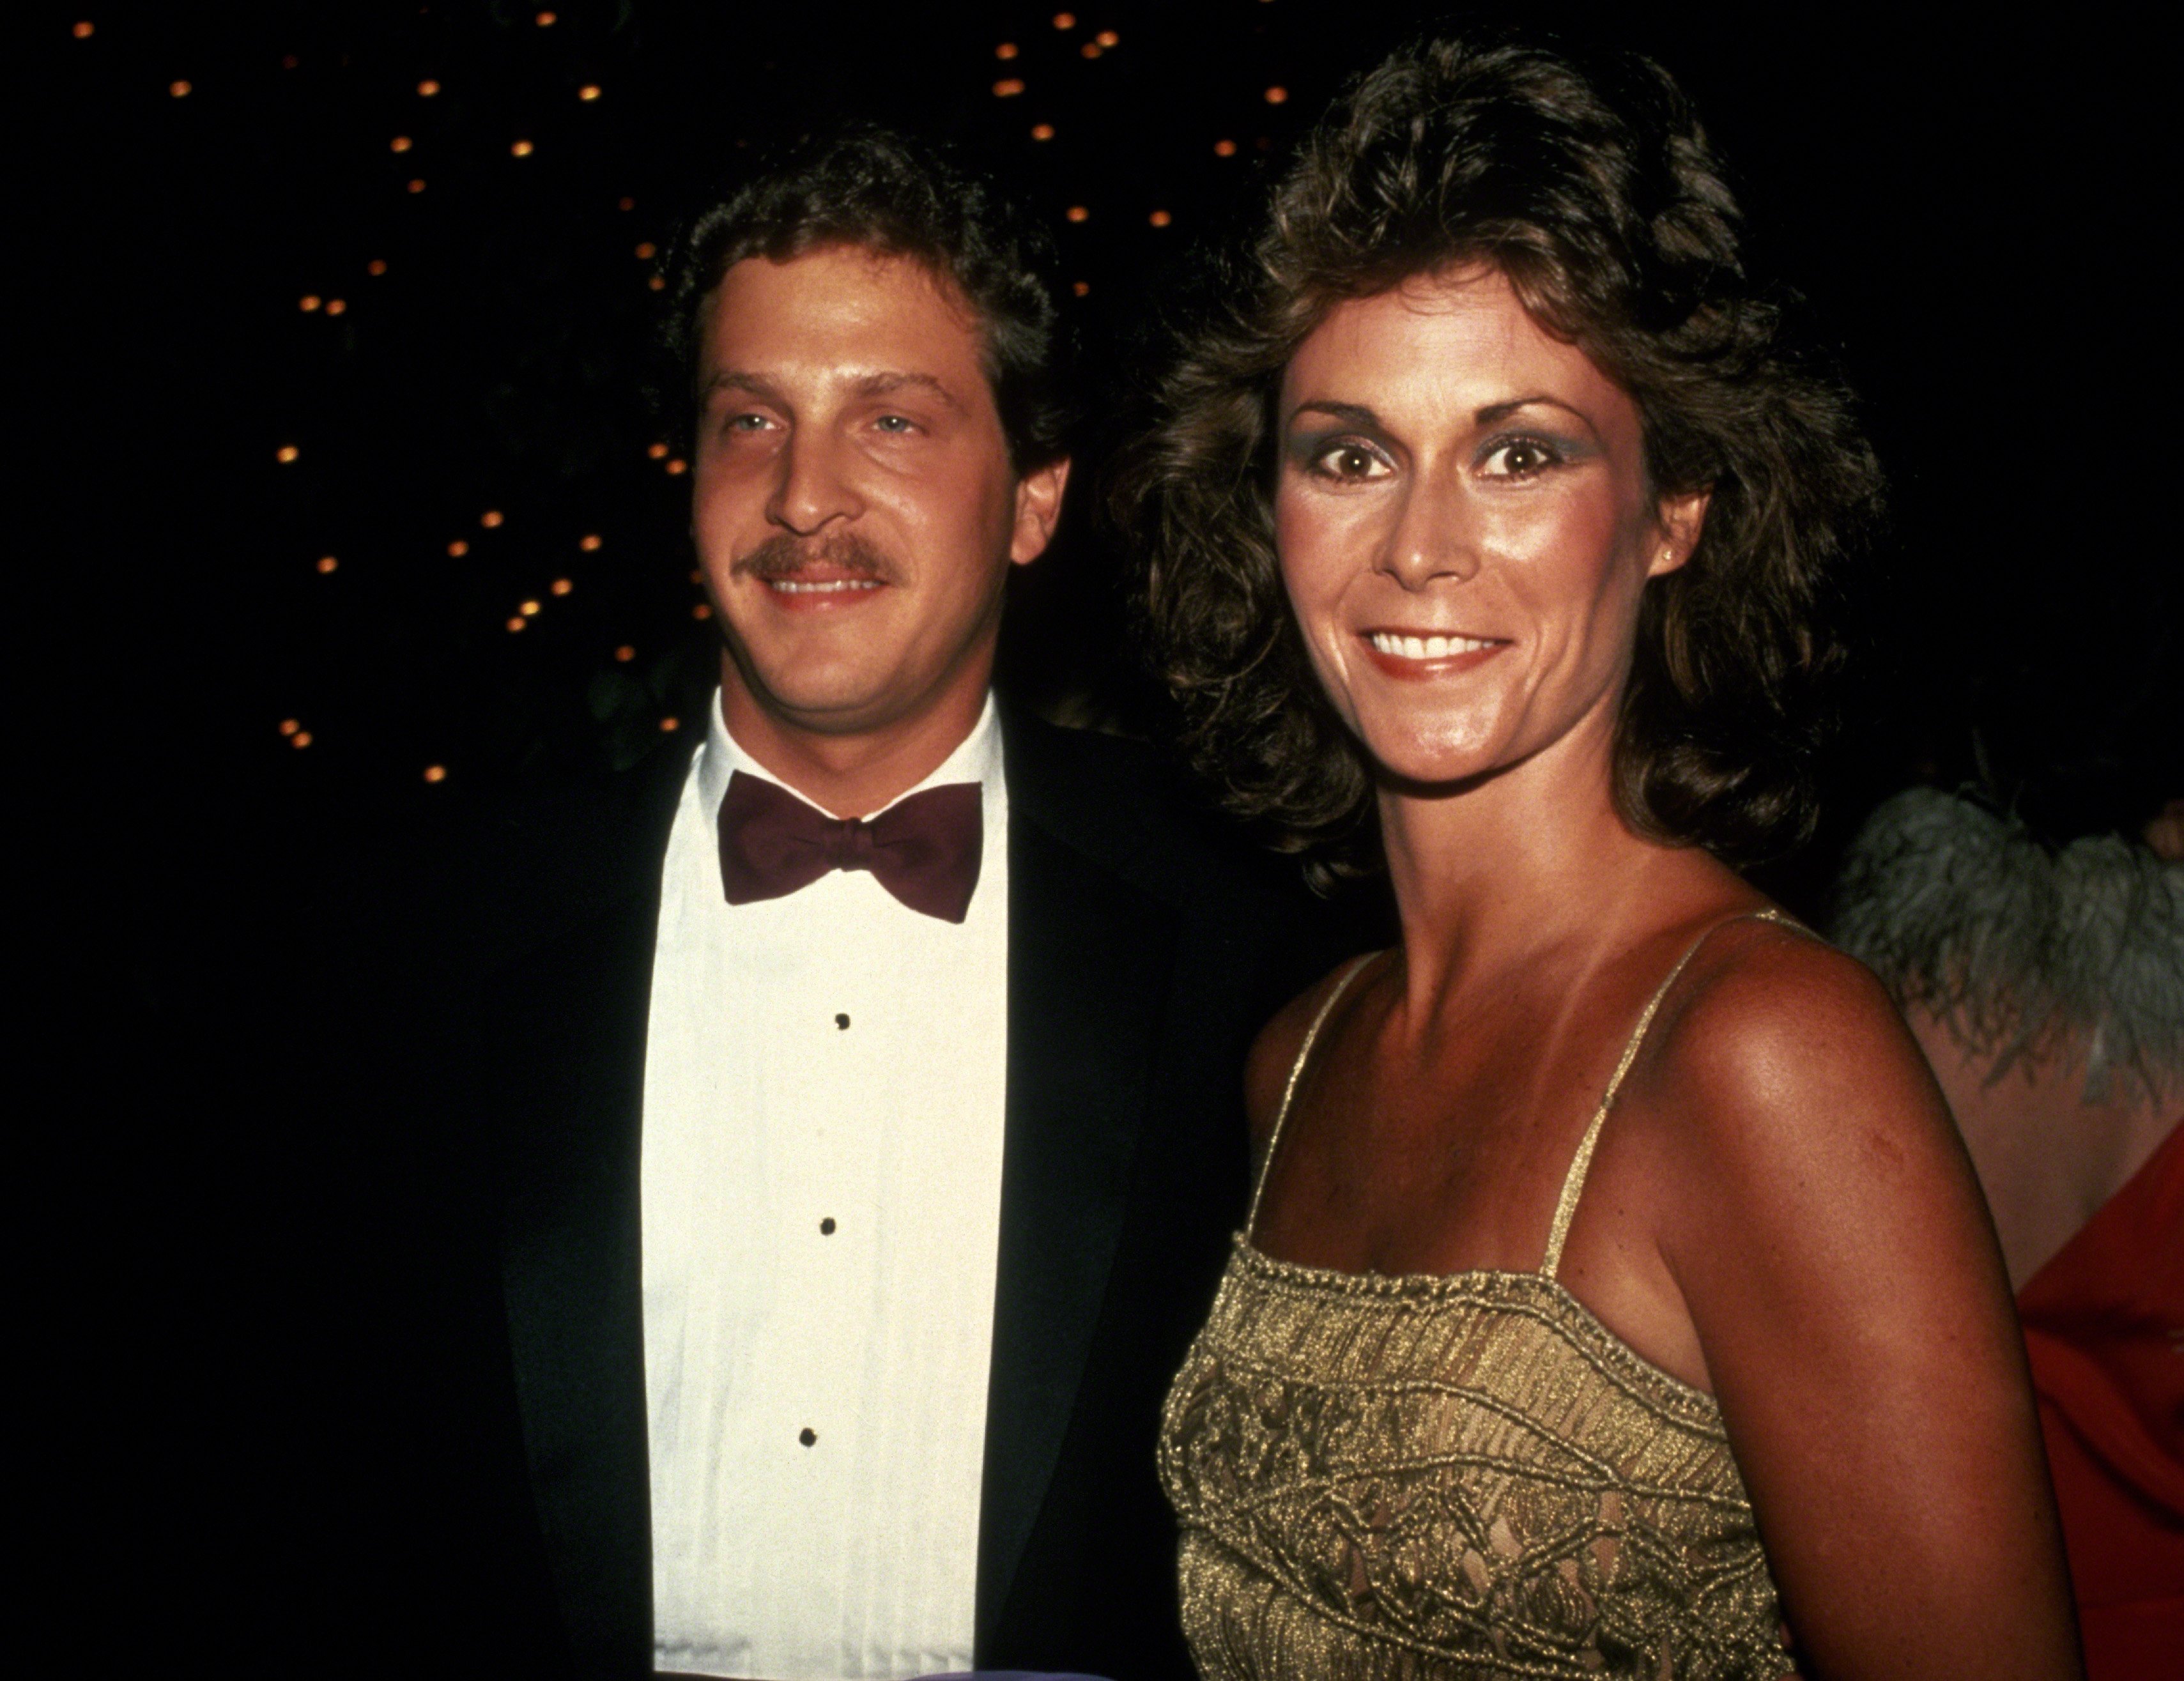  Kate Jackson and husband David Greenwald circa 1983 in New York City. | Source: Getty Images